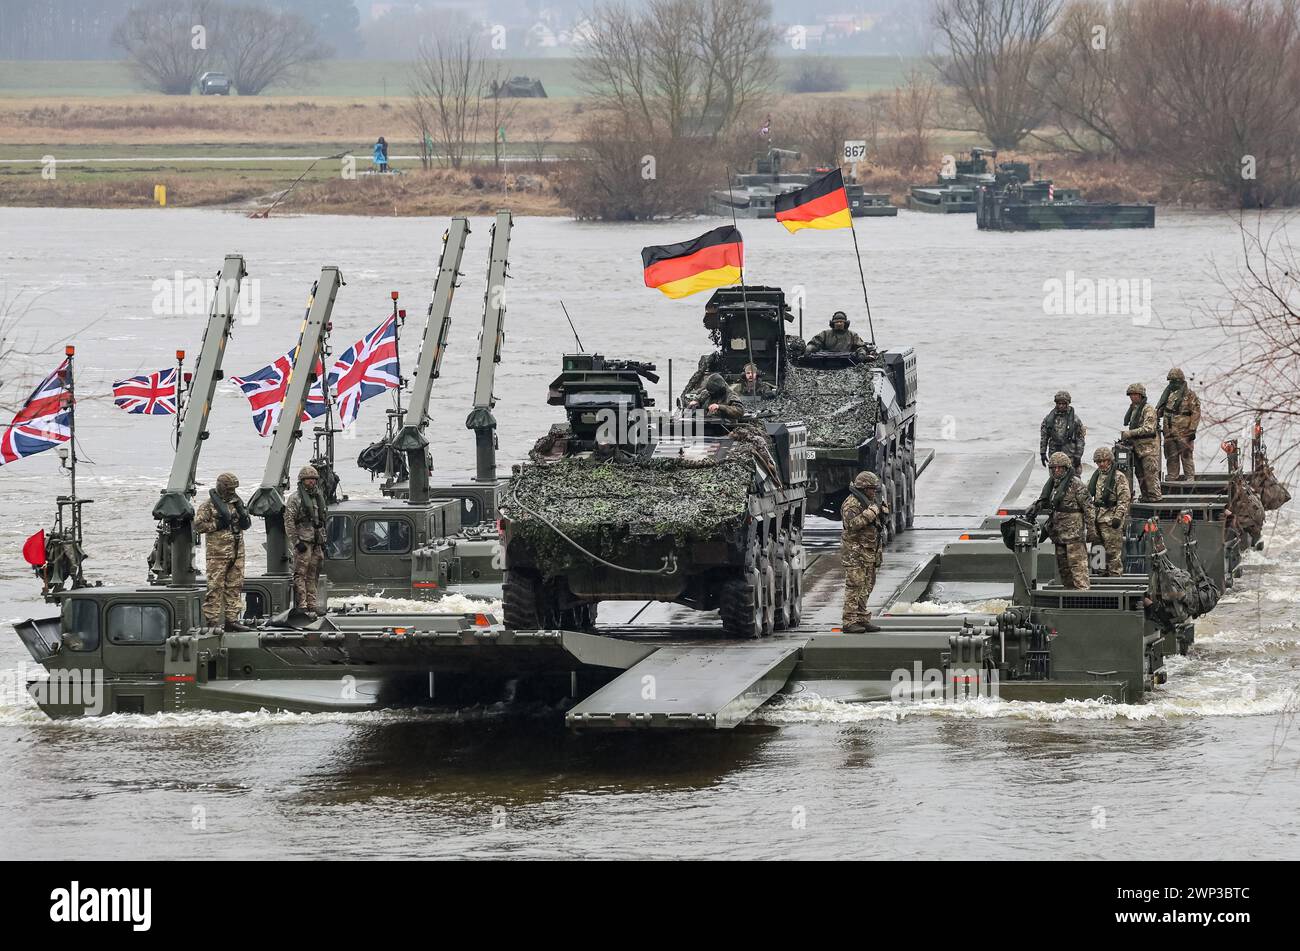 Korzeniewo, Pomorskie, Poland on March 5, 2024. German and British servicemen present transfer of tanks and armored vehicles via Vistula river during NATO's Dragon-24 exercise, a part of large scale Steadfast Defender-24 exercise. The exercises, which take place mainly in Central Europe, involve some 90,000 troops from all NATO countries as well as Sweden. The aim of Steadfast Defender-24 is to deter and present defensive abilities in the face of aggression. Credit: Dominika Zarzycka/Alamy Live News Stock Photo